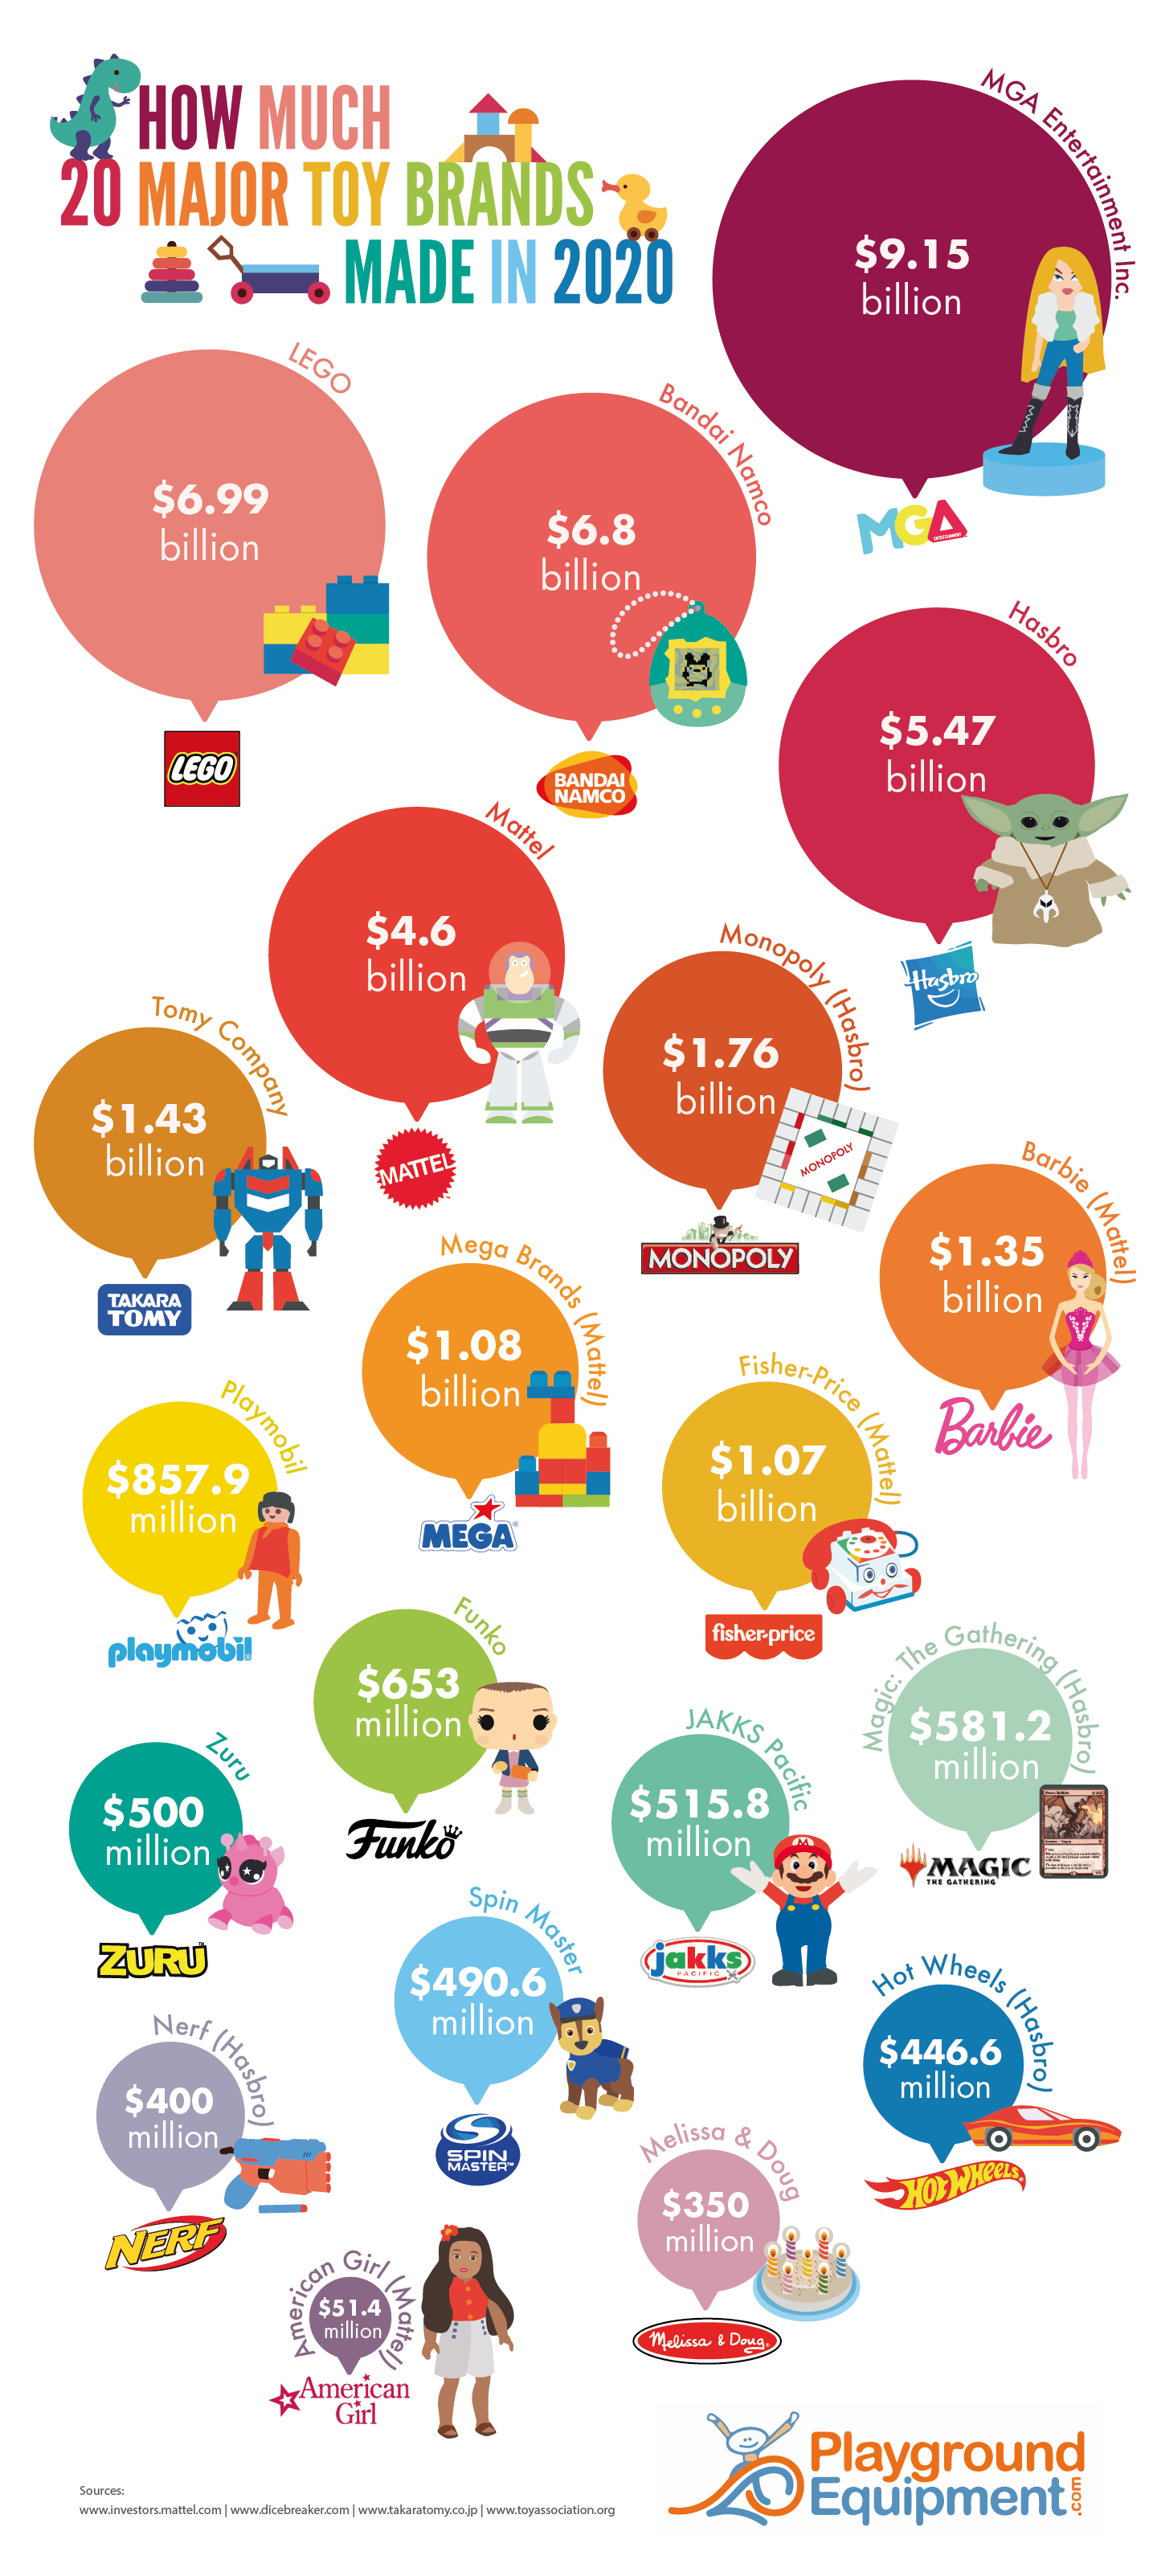 How Much 20 Major Toy Brands Made in 2020 - PlaygroundEquipment.com - Infographic